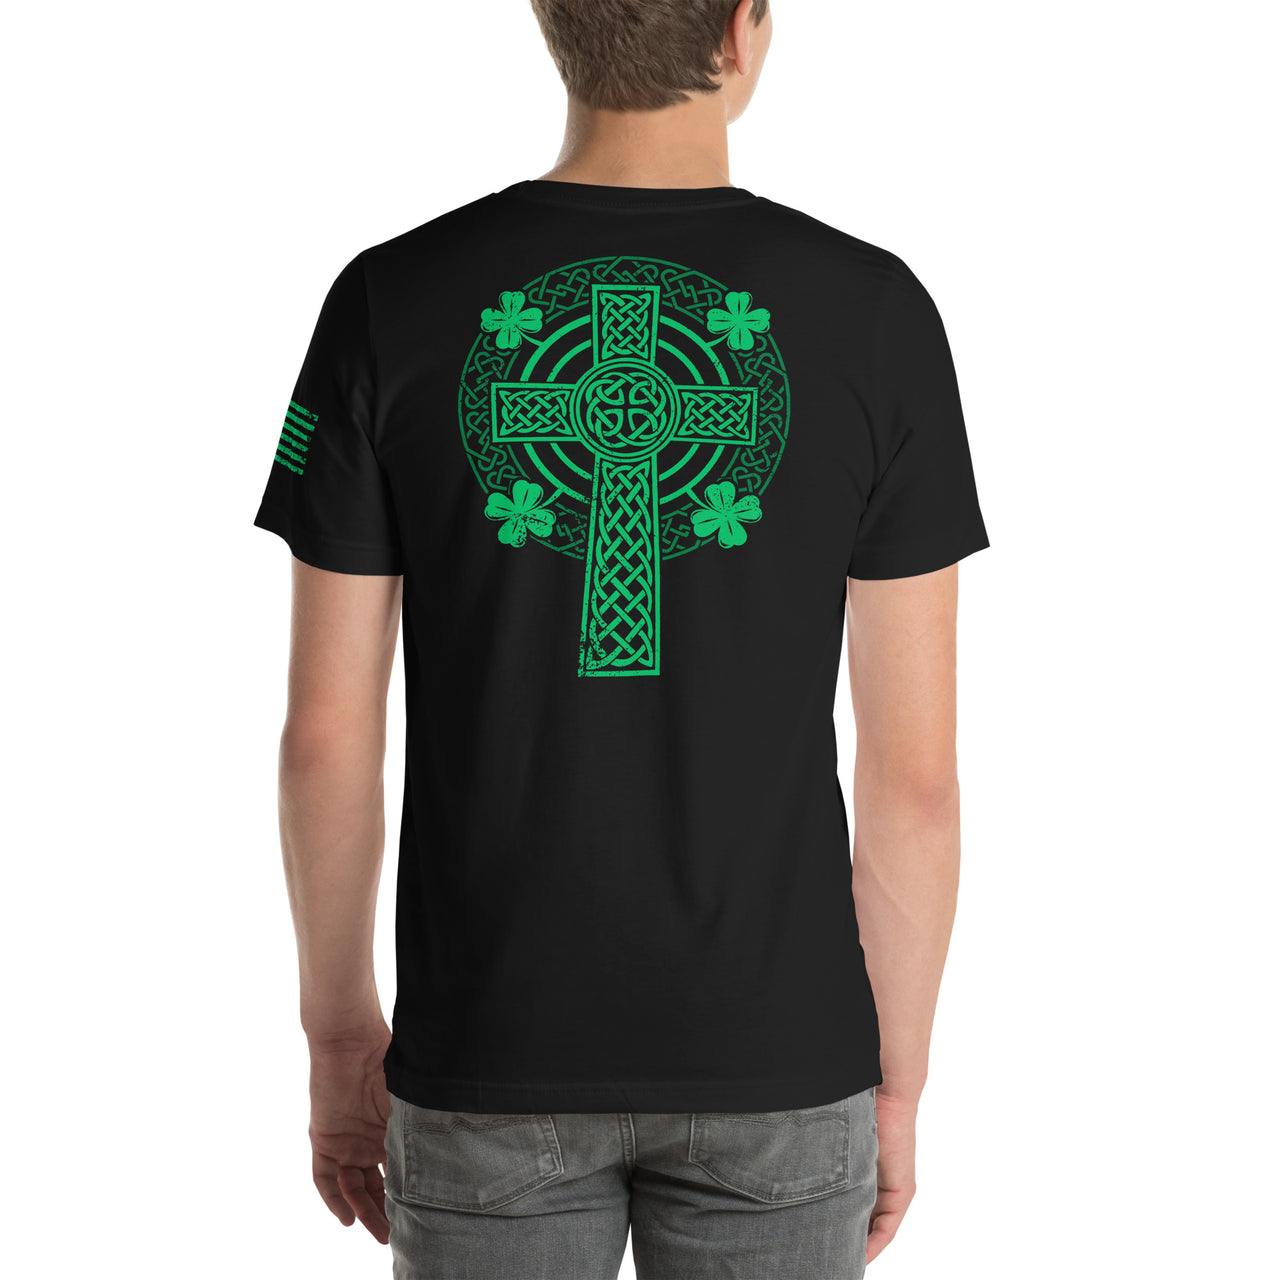 Celtic Cross T-Shirt With 4 Leaf Clover And American Flag modeled in black back view